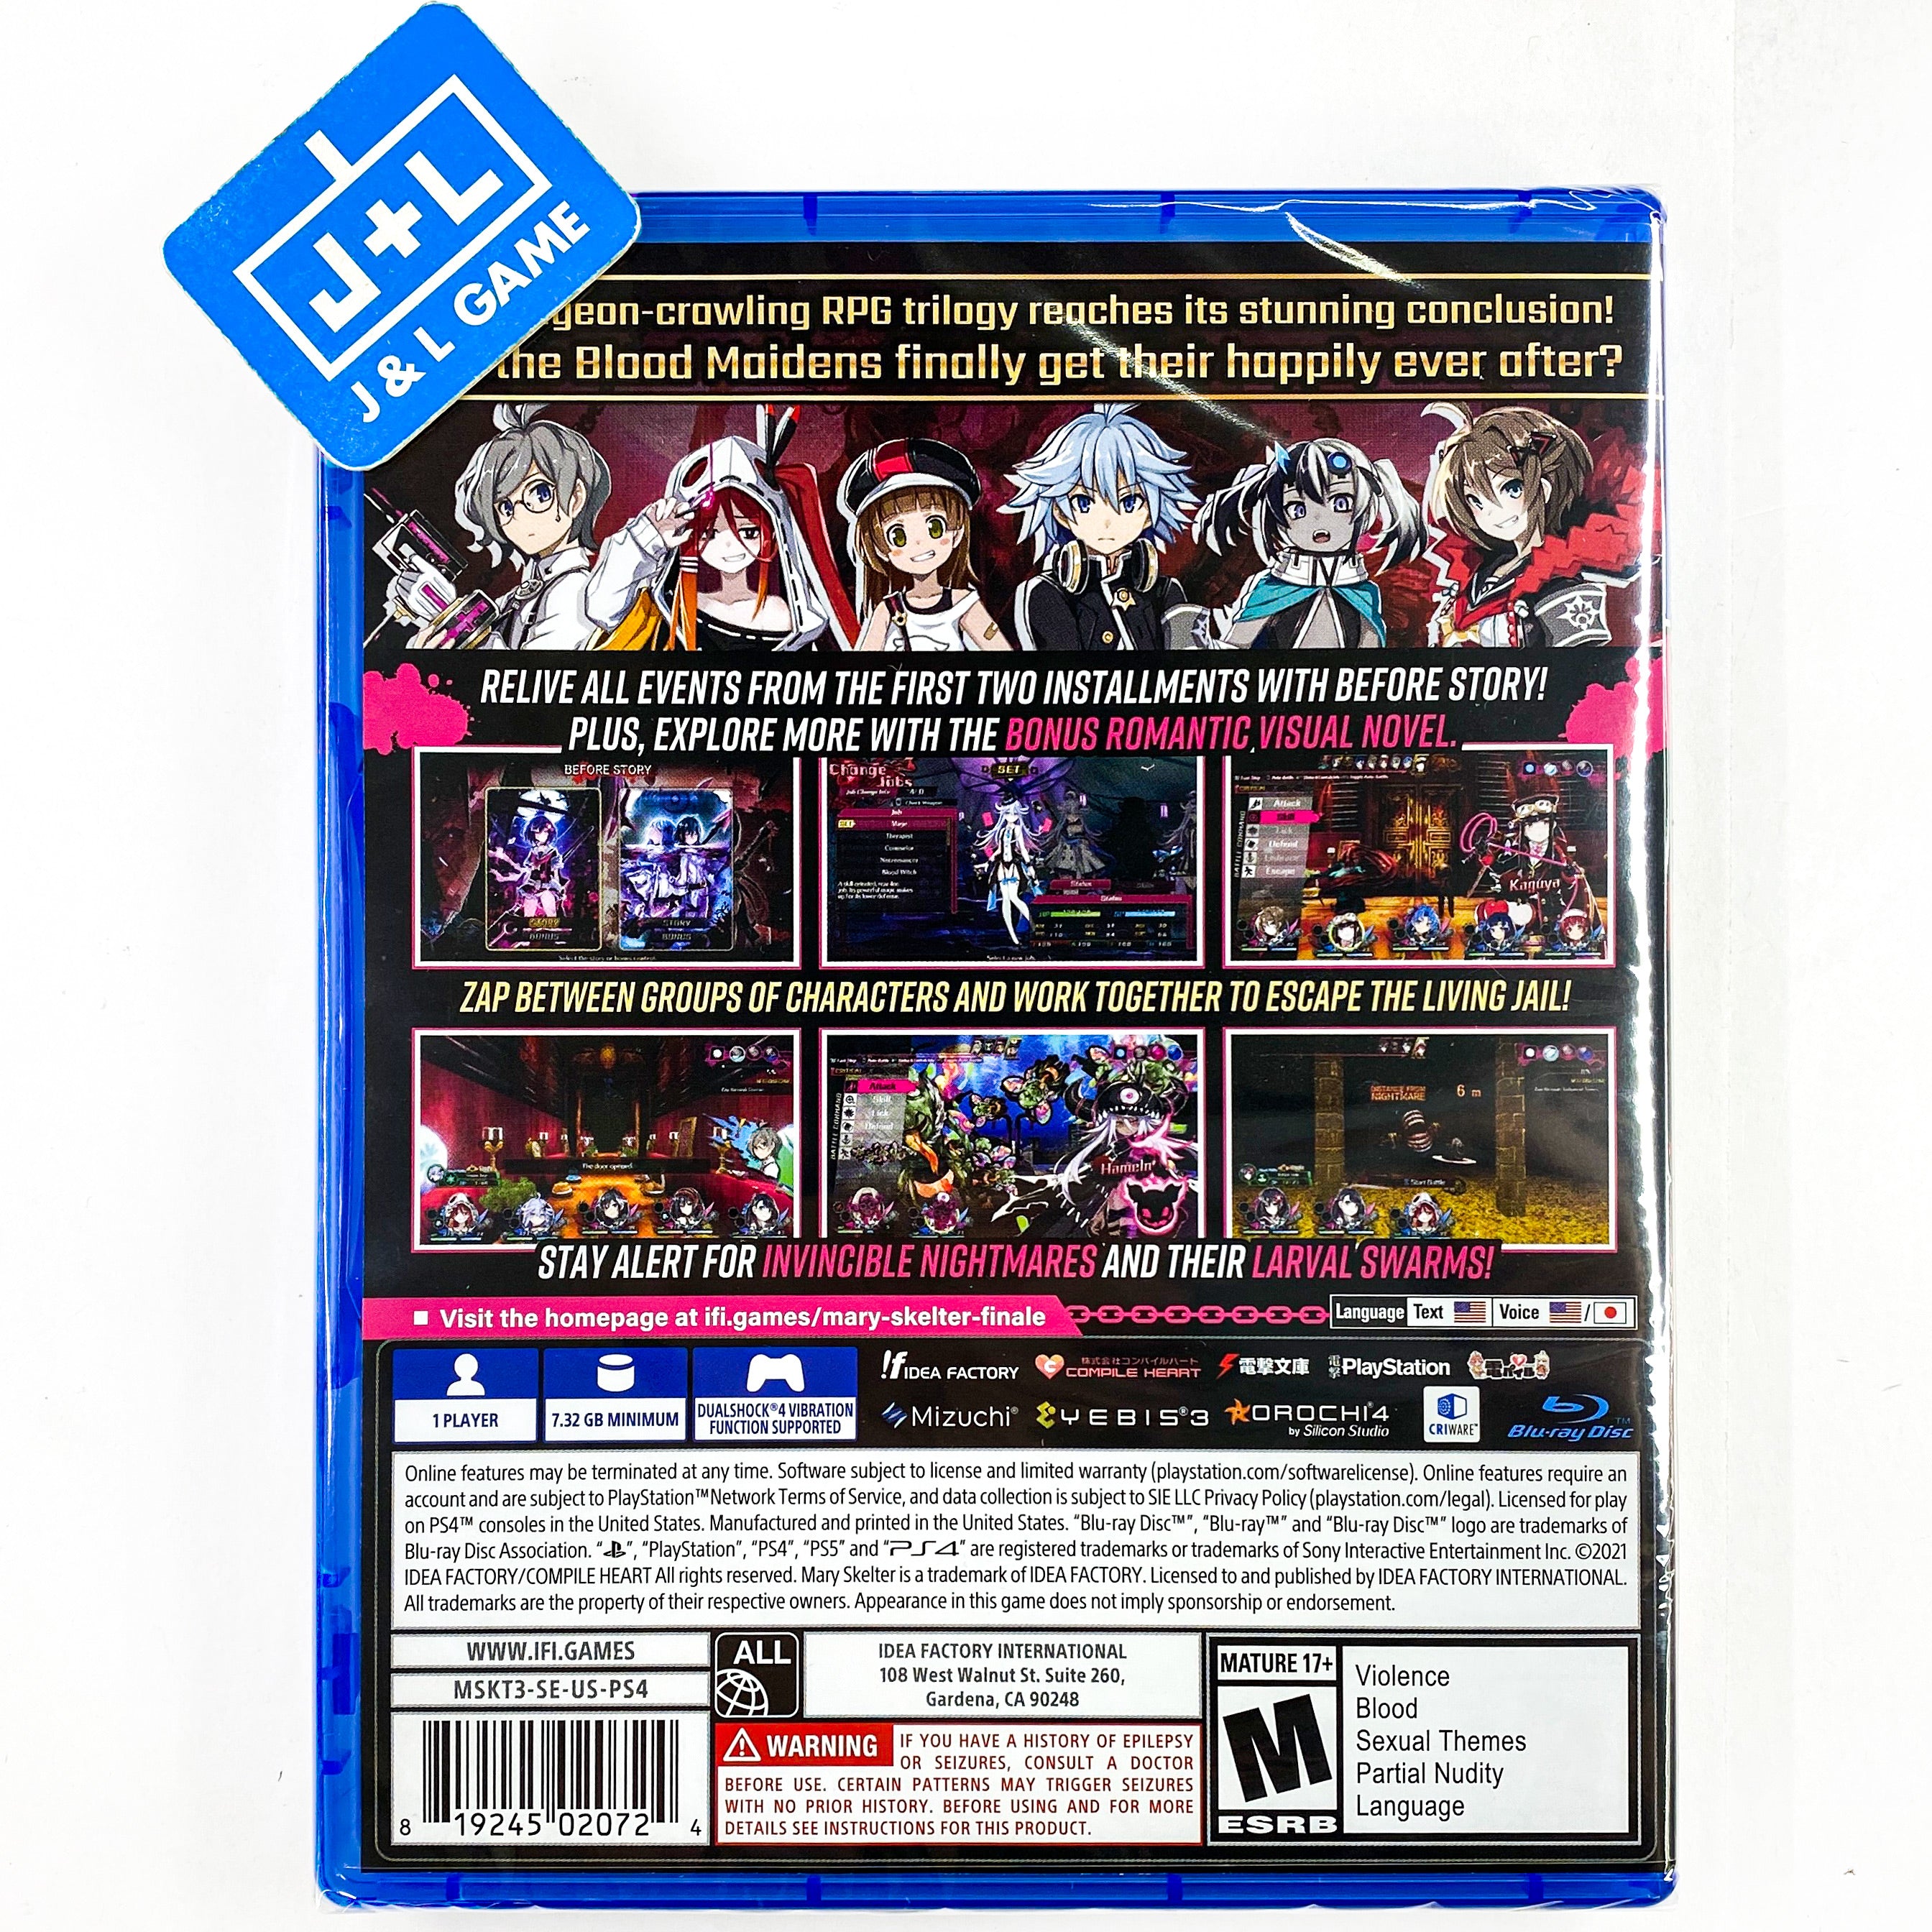 Mary Skelter Finale - PlayStation 4 Video Games Idea Factory International   